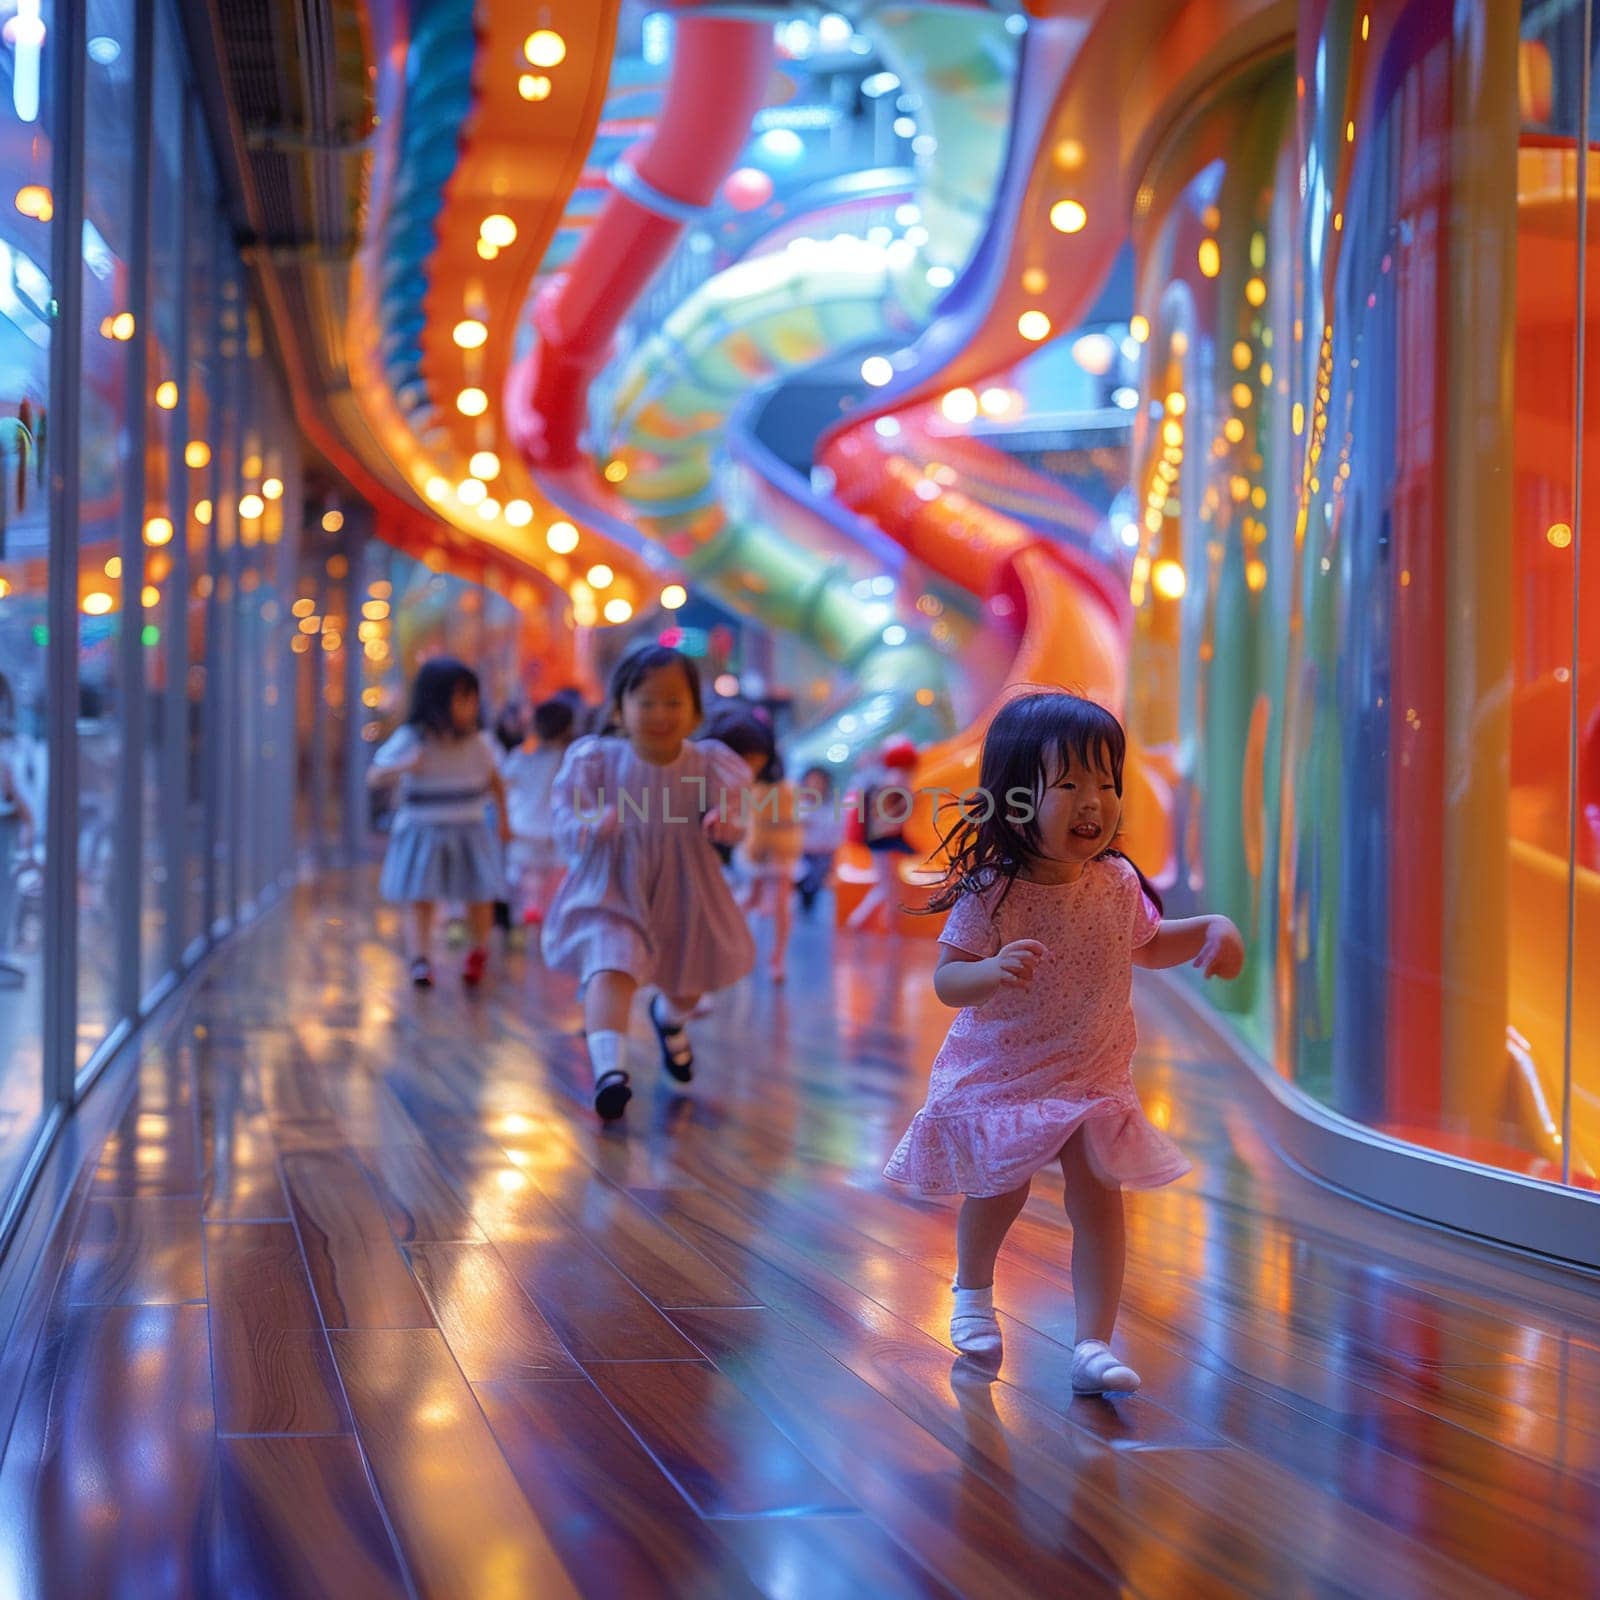 Lively Children Play Center Buzzing with Family-Friendly Business, The cheerful blur of playing children and families represents a thriving family business atmosphere.